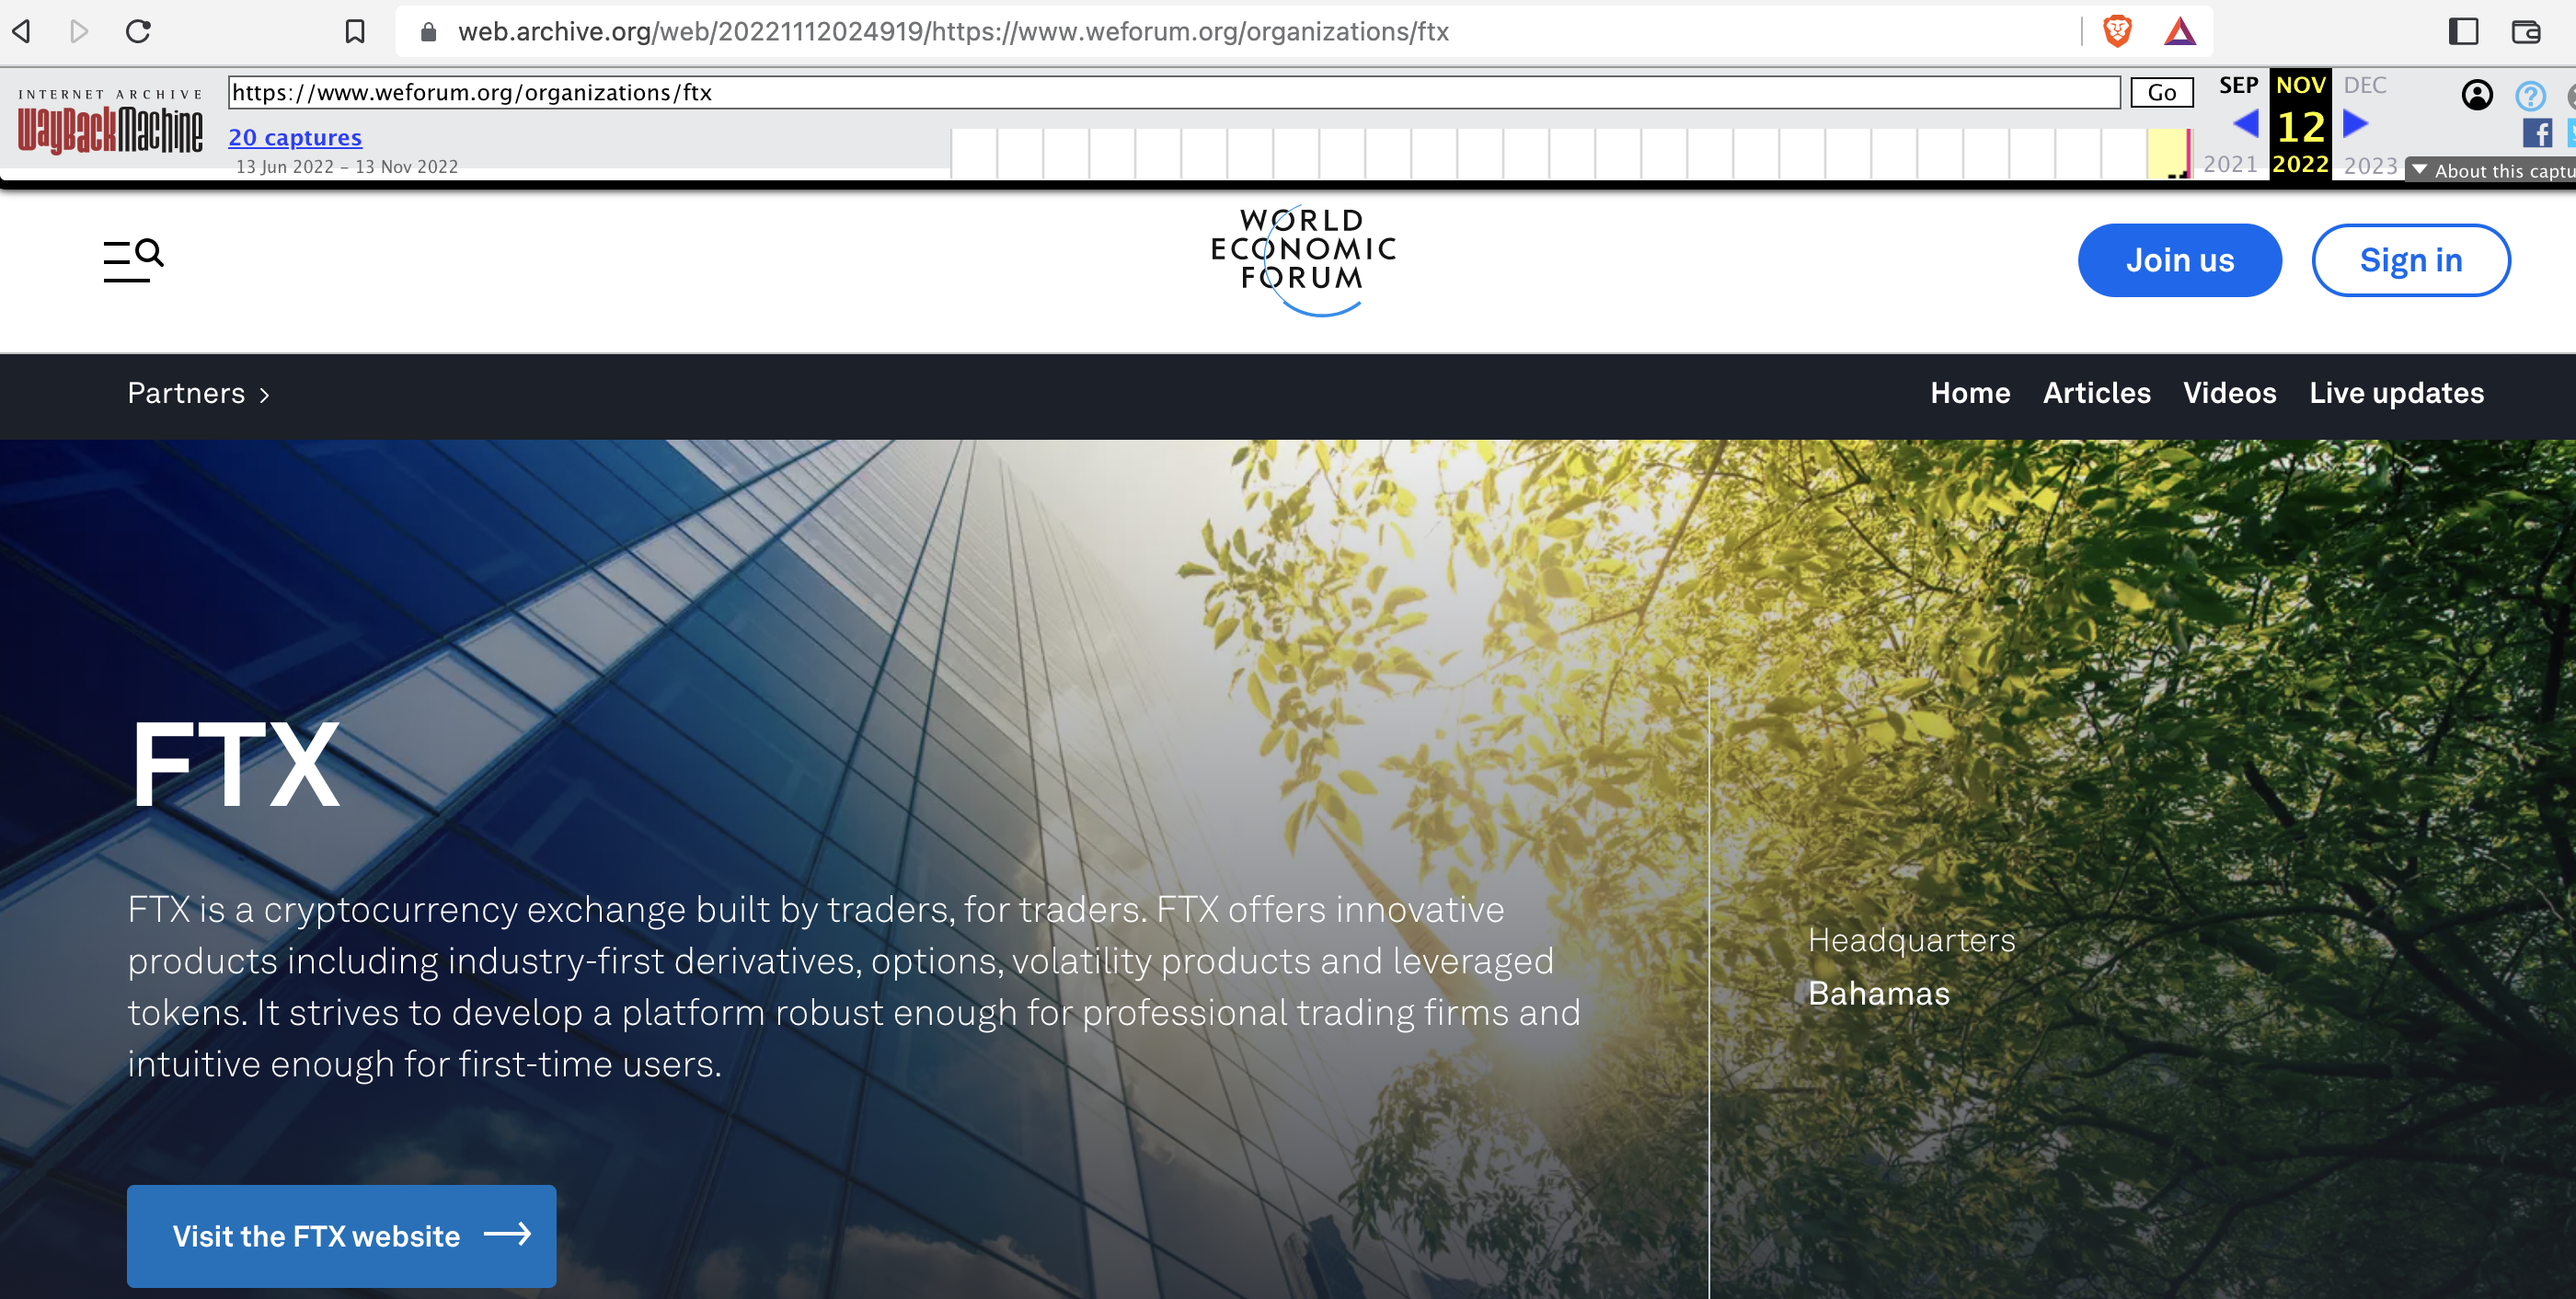 World Economic Forum Removes FTX Promotion As A 'Partner' From Its Website